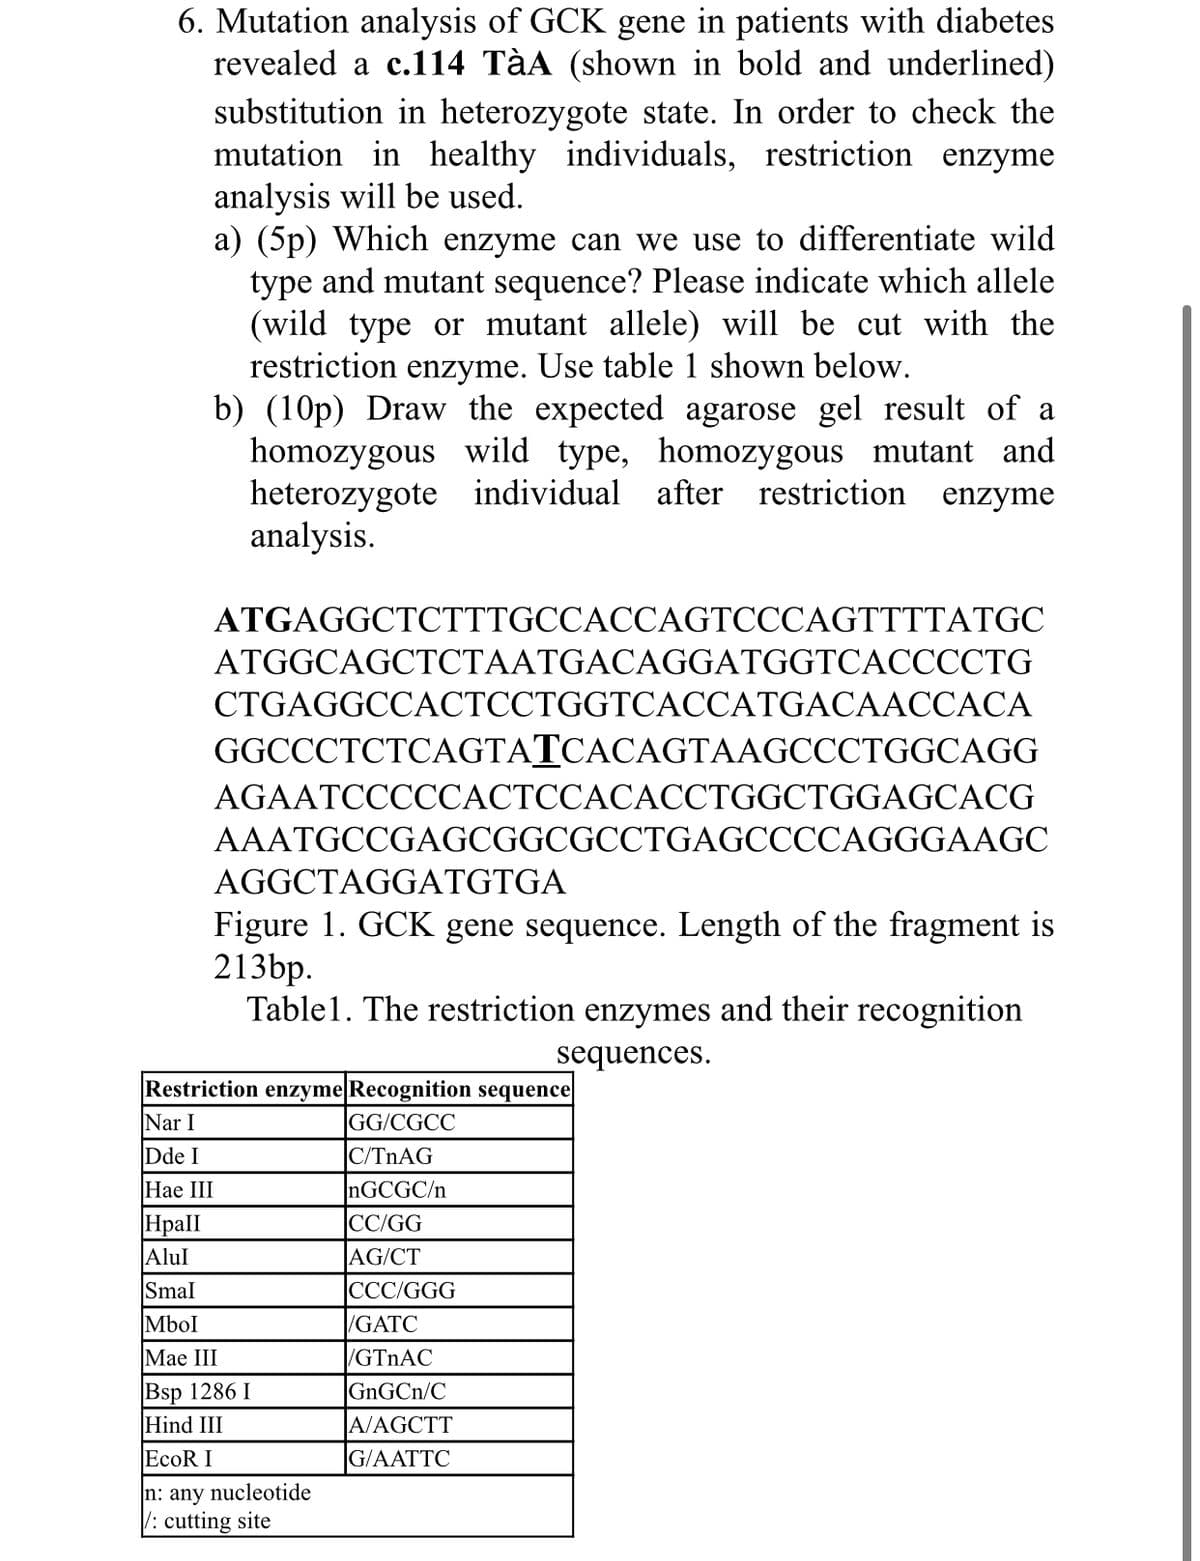 6. Mutation analysis of GCK gene in patients with diabetes
revealed a c.114 TàA (shown in bold and underlined)
substitution in heterozygote state. In order to check the
mutation in healthy individuals, restriction enzyme
analysis will be used.
a) (5p) Which enzyme can we use to differentiate wild
type and mutant sequence? Please indicate which allele
(wild type or mutant allele) will be cut with the
restriction enzyme. Use table 1 shown below.
b) (10p) Draw the expected agarose gel result of a
homozygous wild type, homozygous mutant and
heterozygote individual after restriction enzyme
analysis.
ATGAGGCTCTTTGCCACCAGTCCCAGTTTTATGC
ATGGCAGCTCTAATGACAGGATGGTCACCCCTG
CTGAGGCCACTCCTGGTCACCATGACAACCACA
GGCCCTCTCAGTATCACAGTAAGCCCTGGCAGG
AGAATCCCCCACTCCACACCTGGCTGGAGCACG
AAATGCCGAGCGGCGCCTGAGCCCCAGGGAAGC
AGGCTAGGATGTGA
Figure 1. GCK gene sequence. Length of the fragment is
213bp.
Table1. The restriction enzymes and their recognition
sequences.
Restriction enzyme|Recognition sequence
GG/CGCC
Nar I
Dde I
|C/TNAG
NGCGC/n
|CC/GG
Hae III
Hpall
|Alul
AG/CT
CCC/GGG
Smal
Mbol
/GATC
Мae III
/GTNAC
|Bsp 1286 I
Hind III
EcoR I
GNGCN/C
A/AGCTT
G/AATTC
n: any nucleotide
: cutting site
